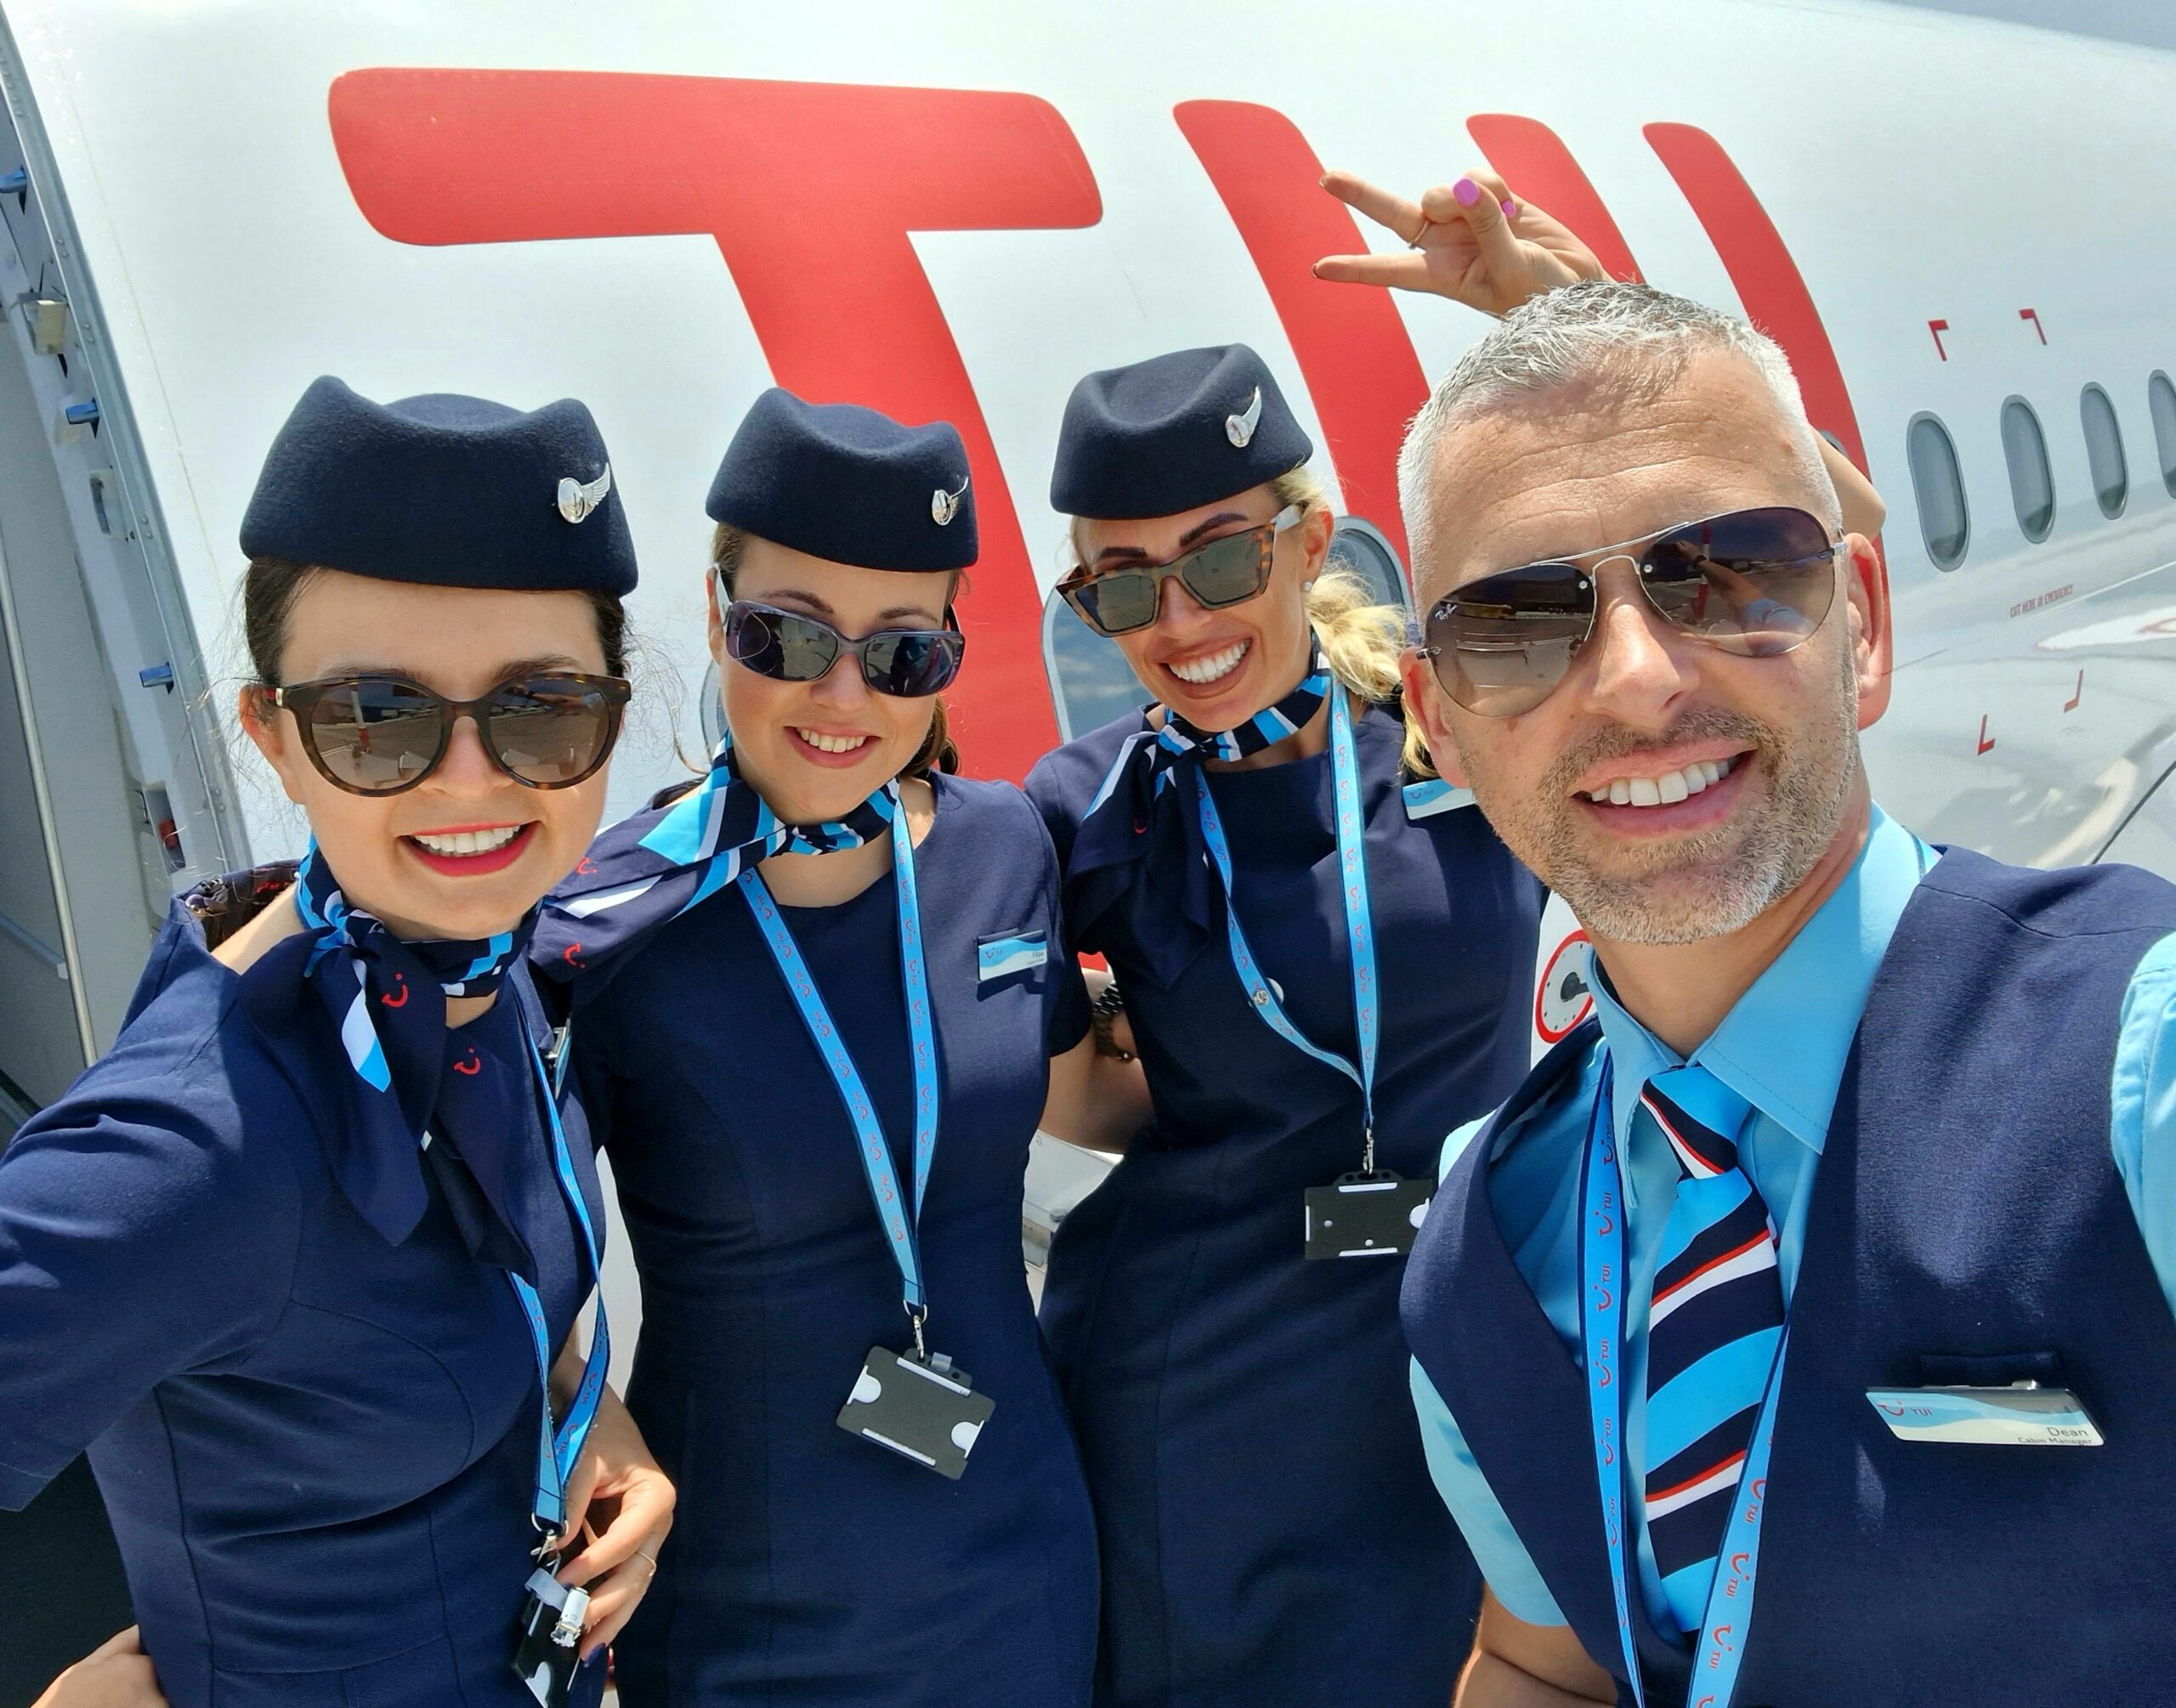 A group of cabin crew members stood on the steps outside the aircraft door. They are smiling with sunglasses on, you can see the TUI text on the plane in the background.